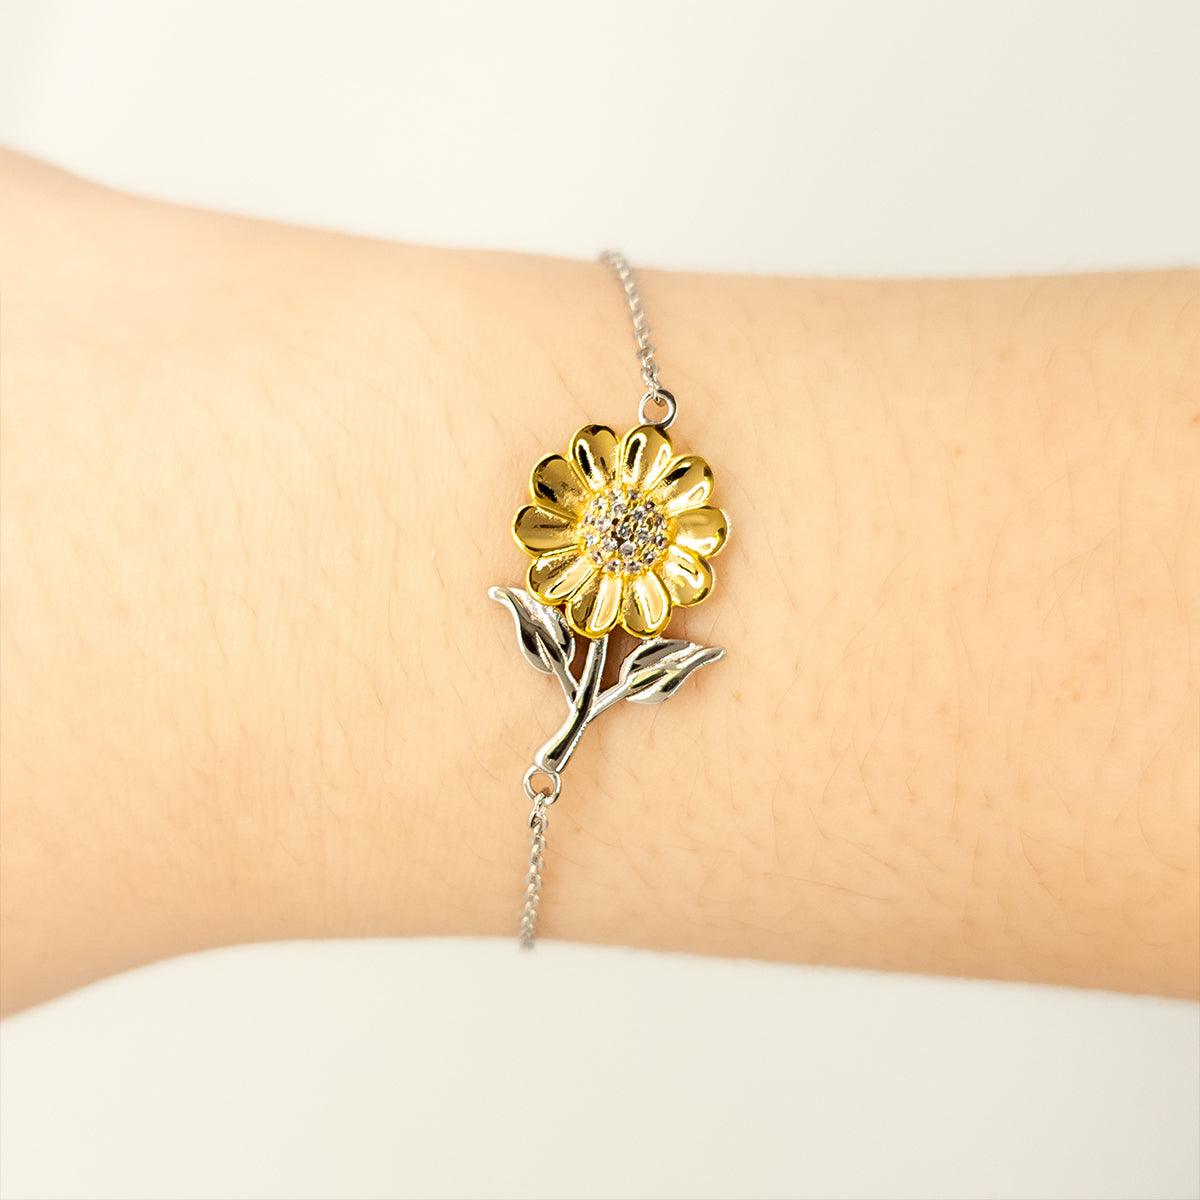 Claims Adjuster Sunflower Bracelet - Thanks for being who you are - Birthday Christmas Jewelry Gifts Coworkers Colleague Boss - Mallard Moon Gift Shop